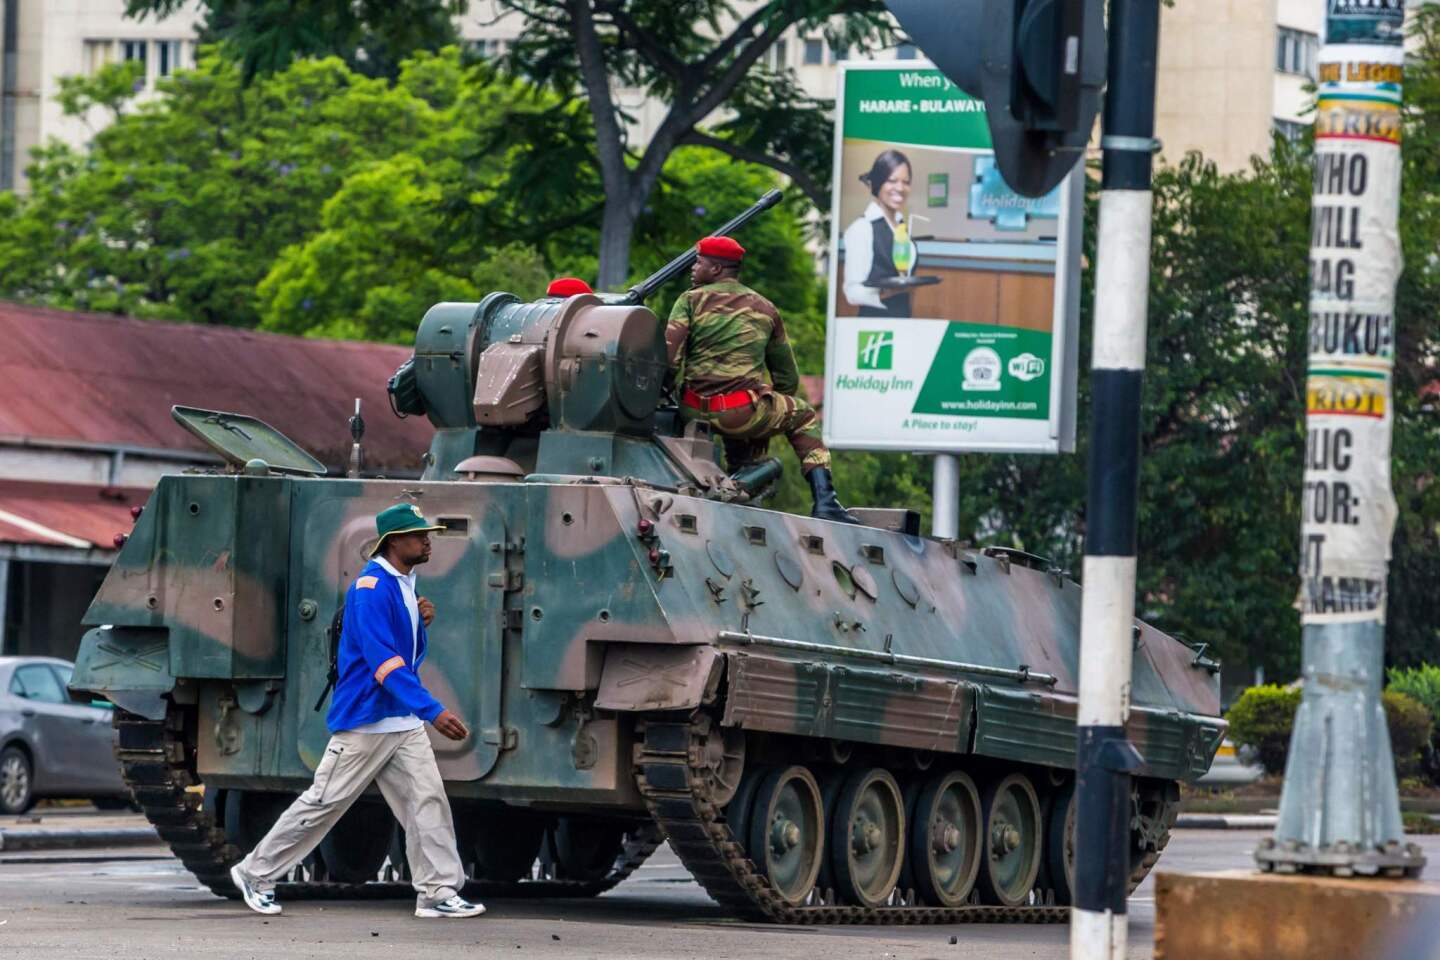 A man walks past an armored personnel carrier as Zimbabwean soldiers regulate traffic in Harare. Zimbabwe's military appeared to be in control of the country as generals denied staging a coup but used state television to vow to target "criminals" close to President Mugabe.